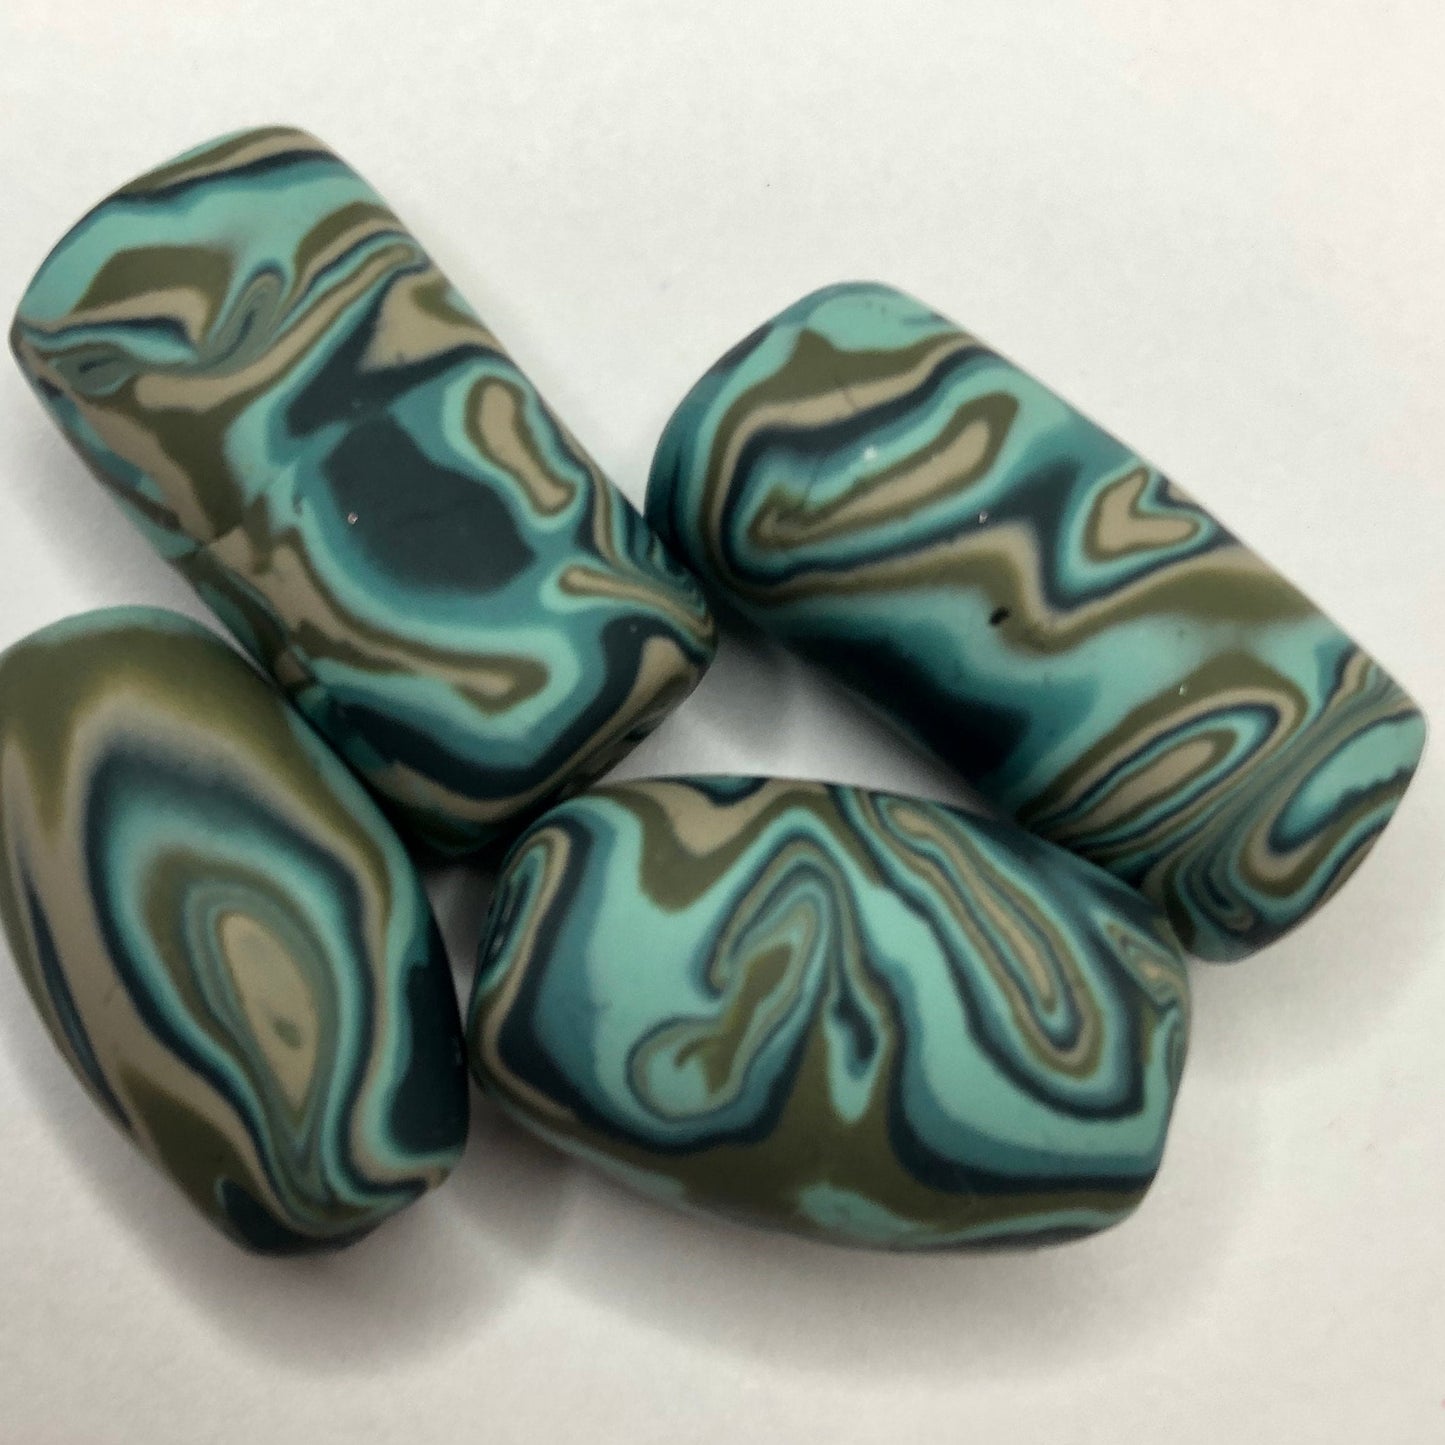 Polymer clay recipes - Sandy Teal